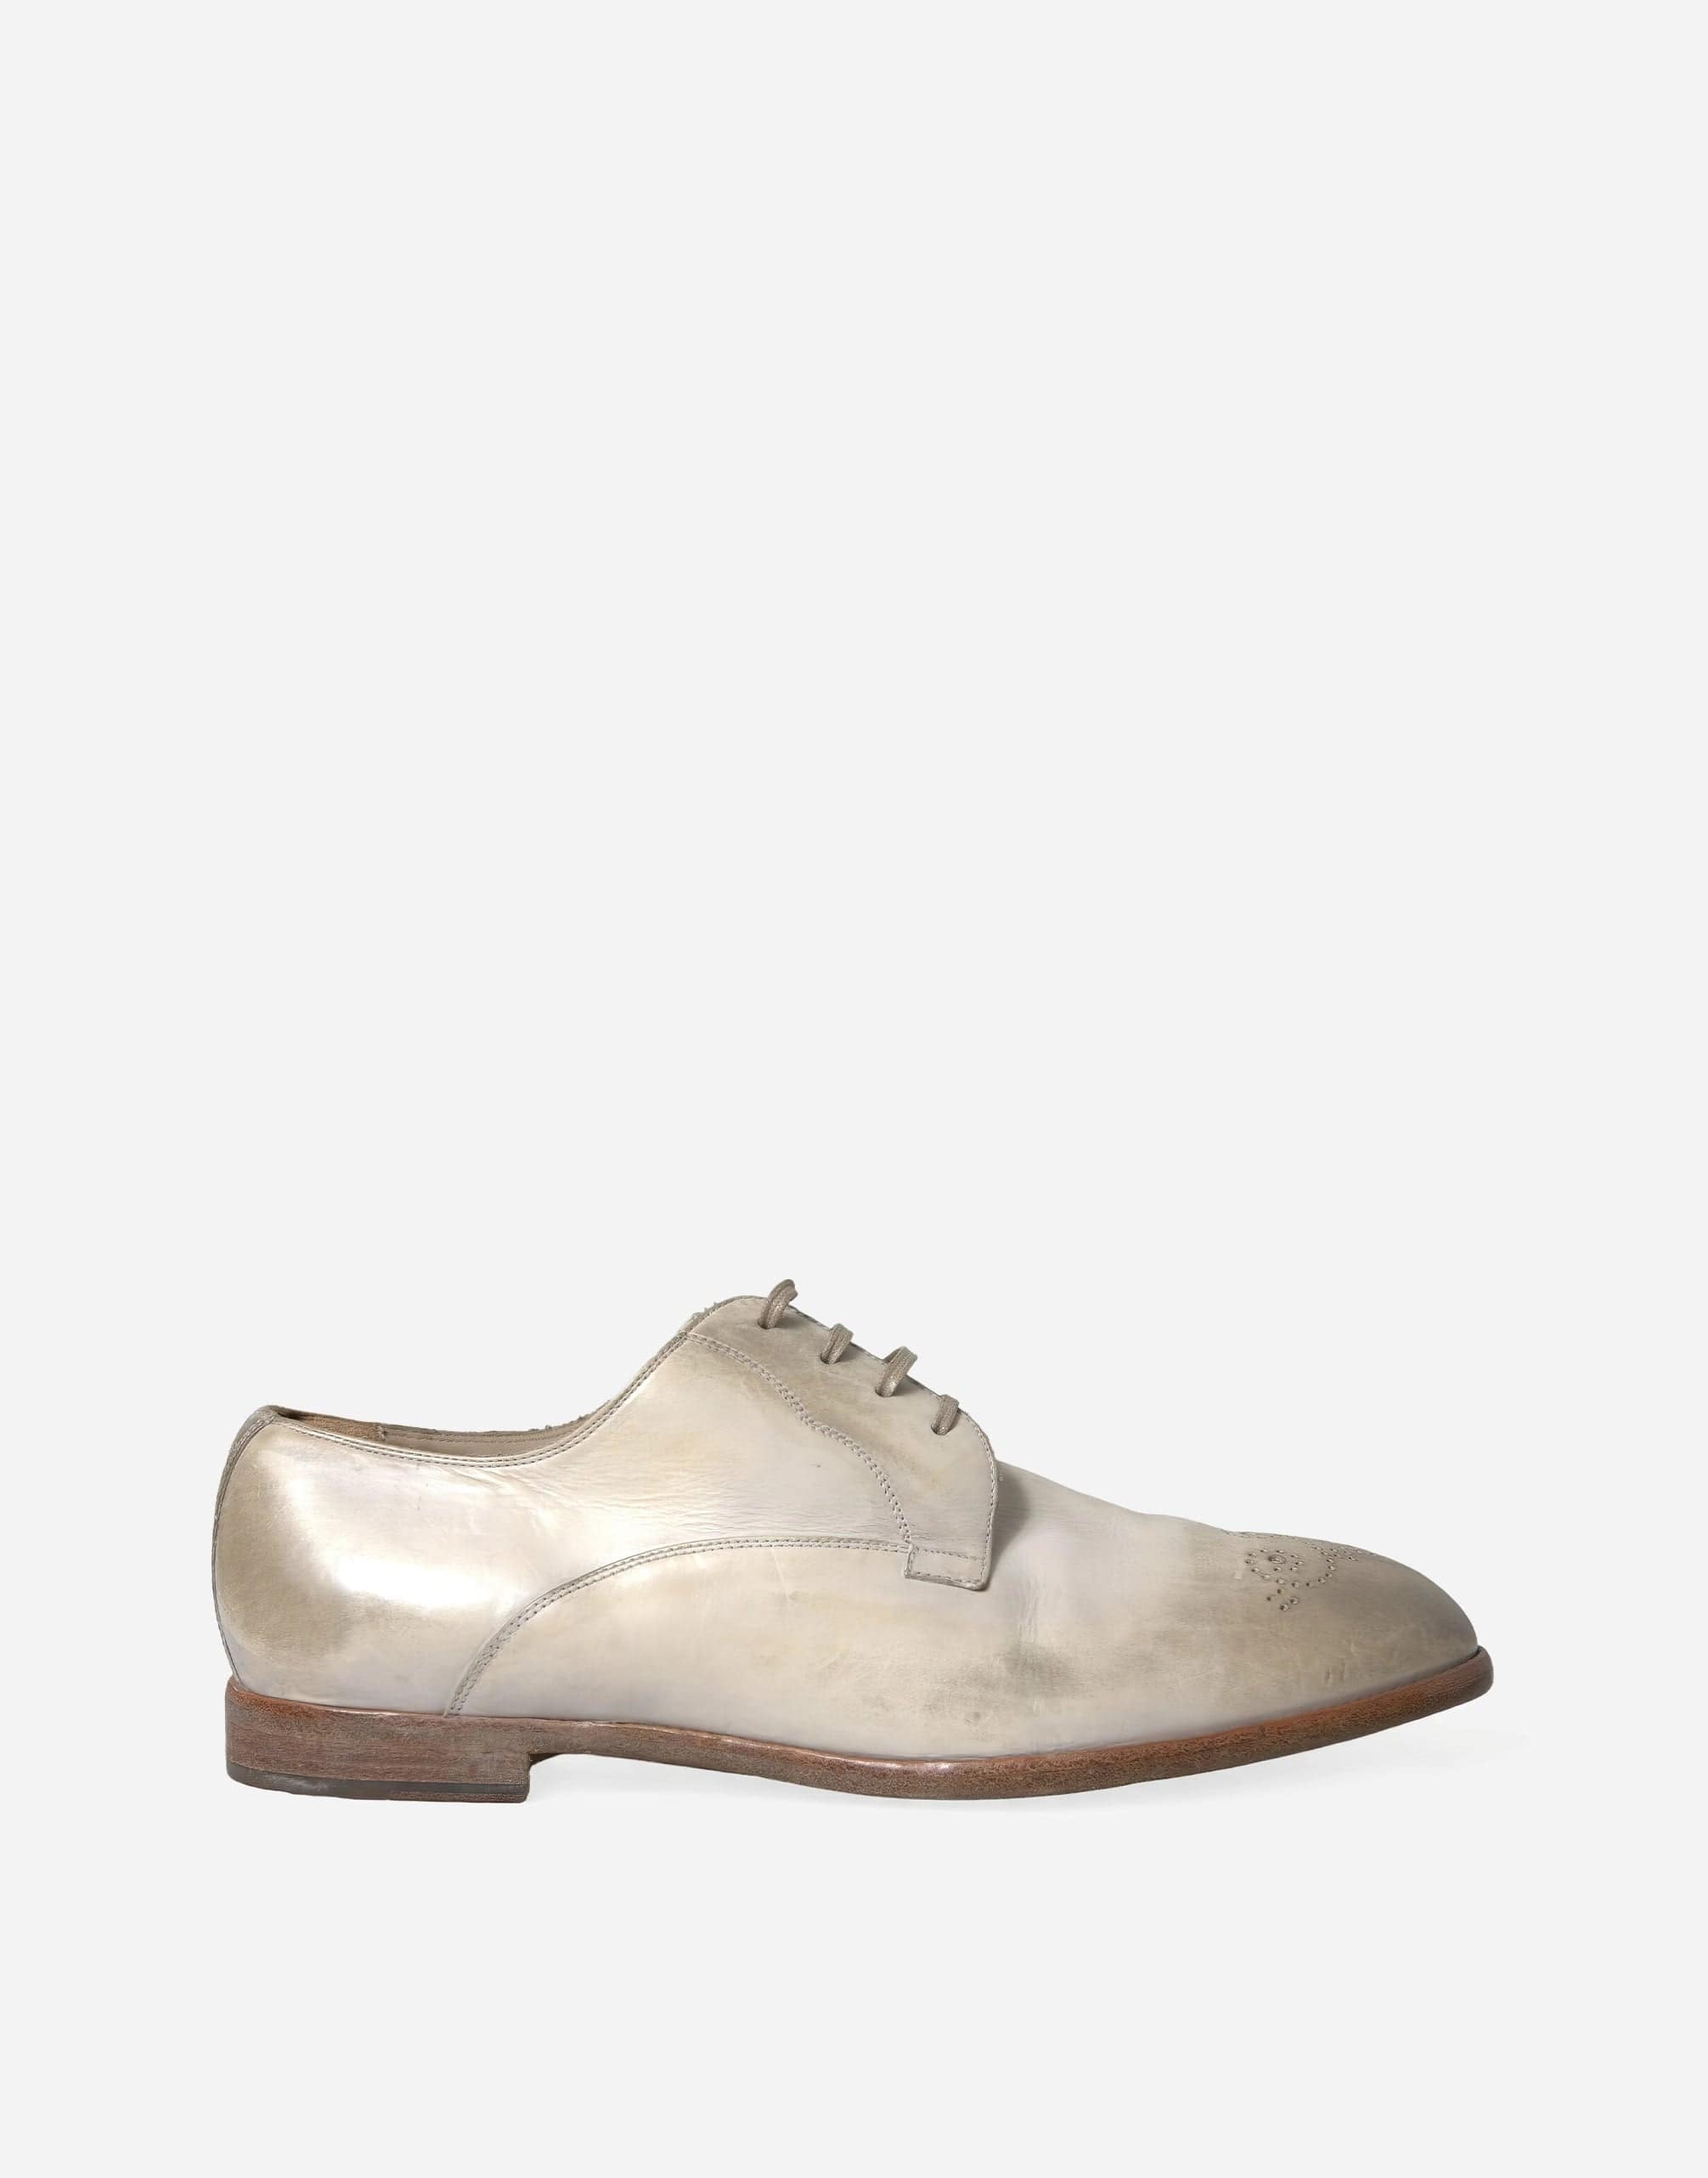 Dolce & Gabbana Distressed Derby Shoes